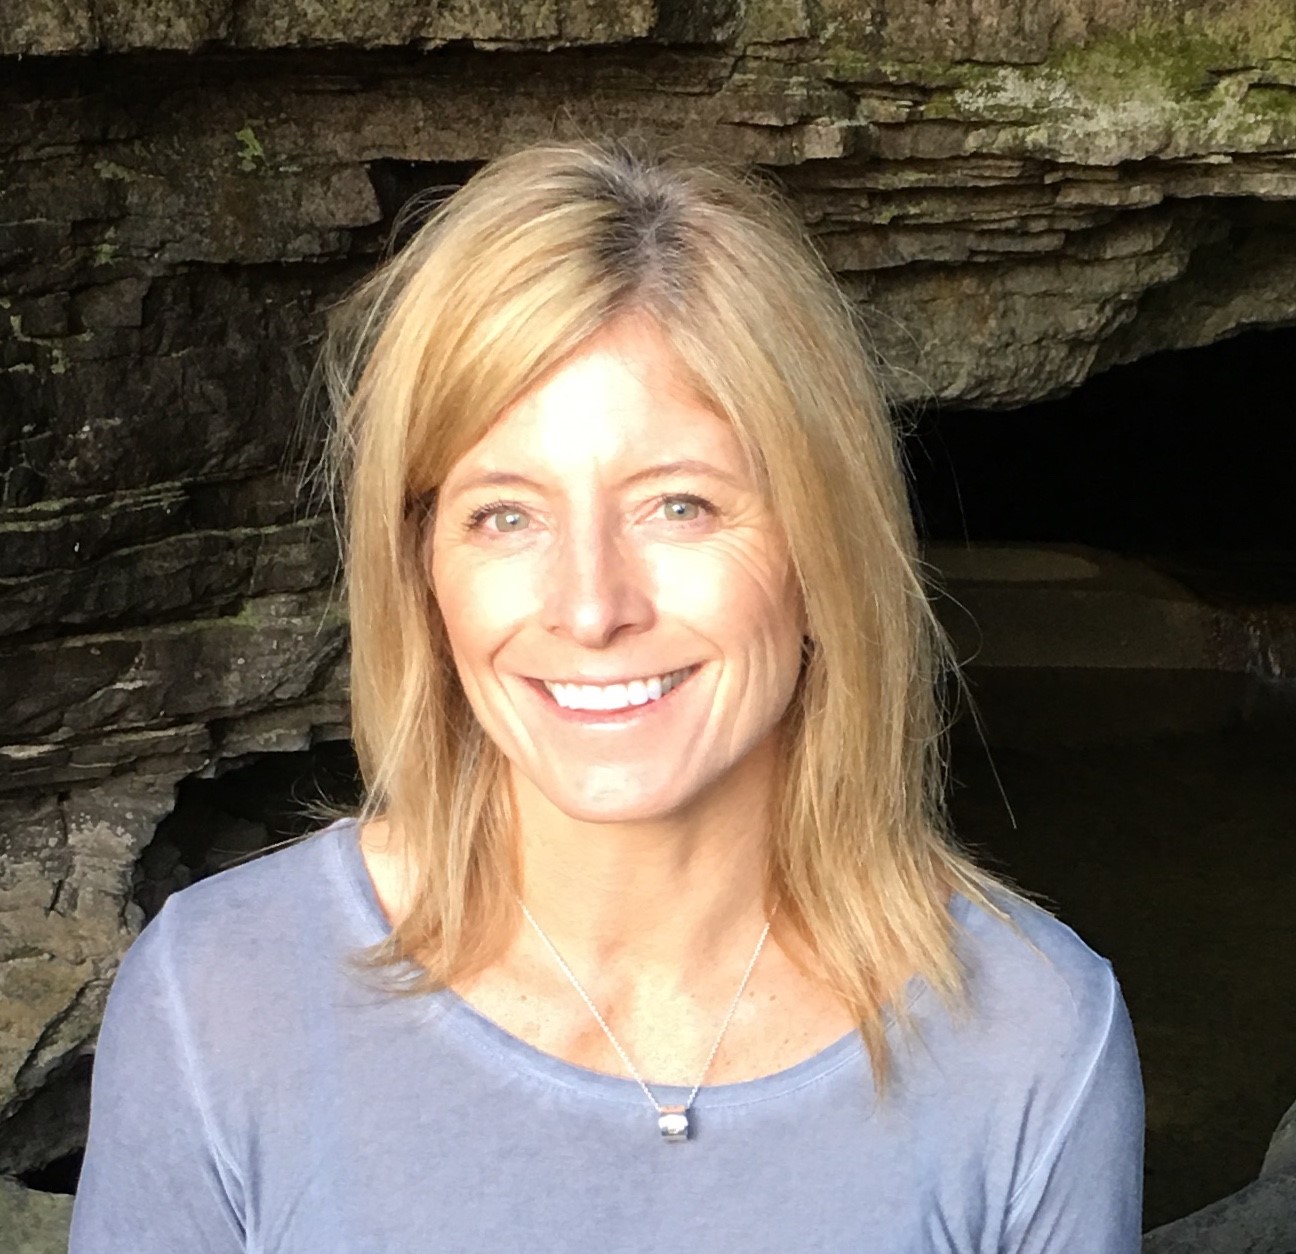 A profile photo of a smiling middle aged woman who has golden brown hair and is wearing a blue casual shirt and a necklace.